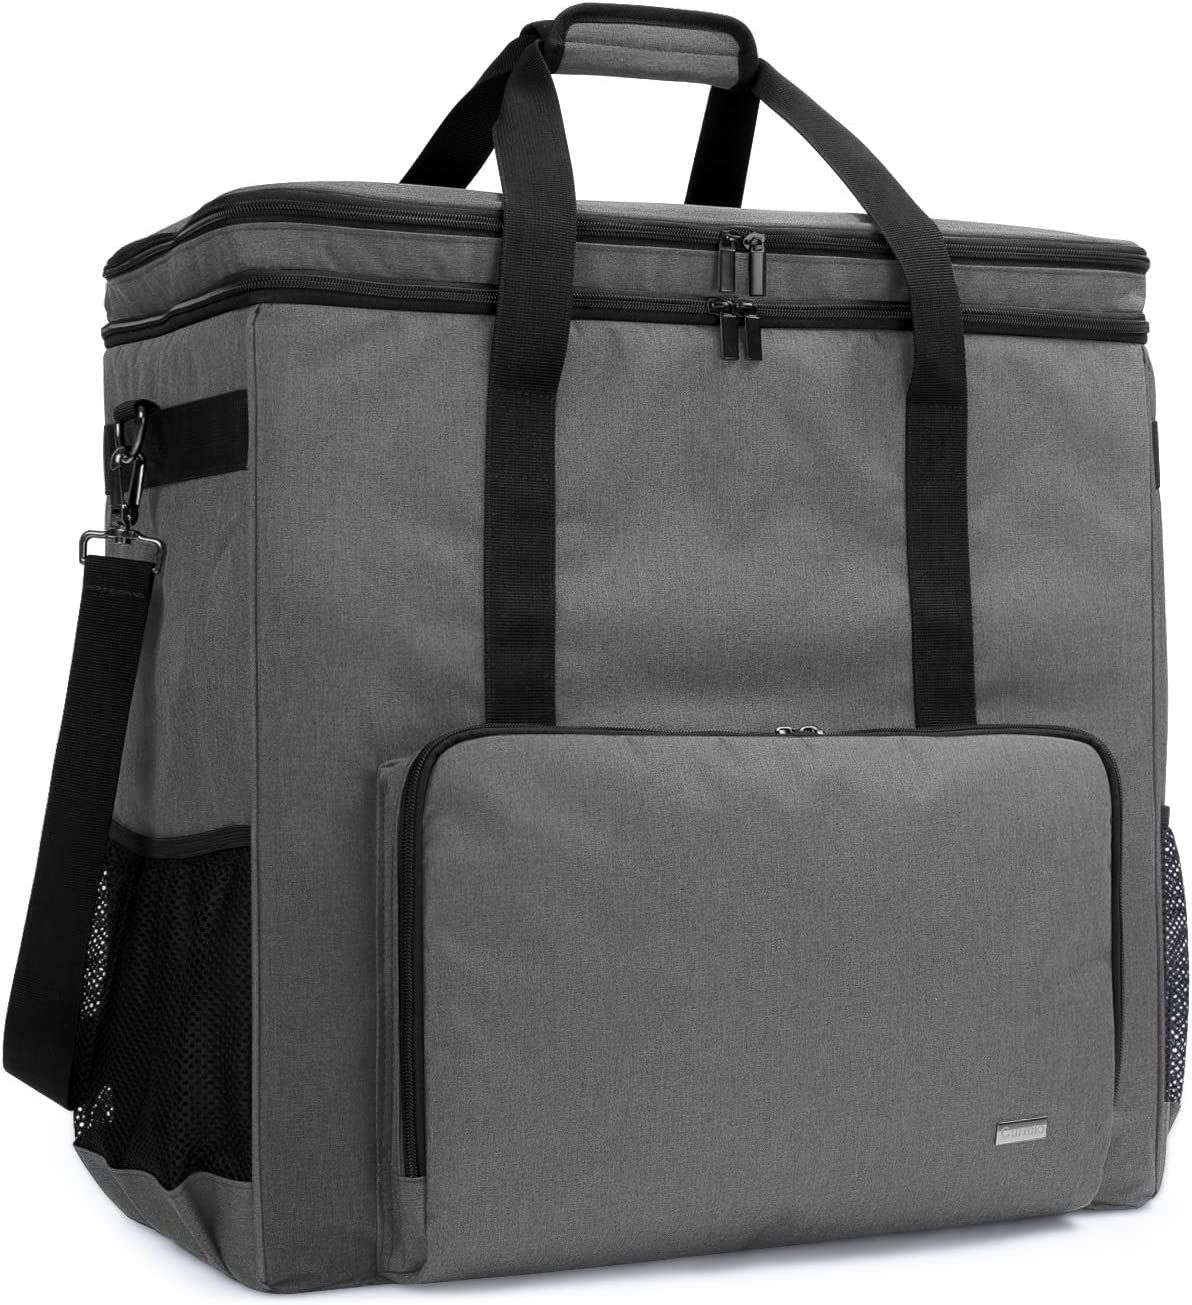 The CURMIO Double-Layer Carrying Case for Computer Tower with the front flap on display.